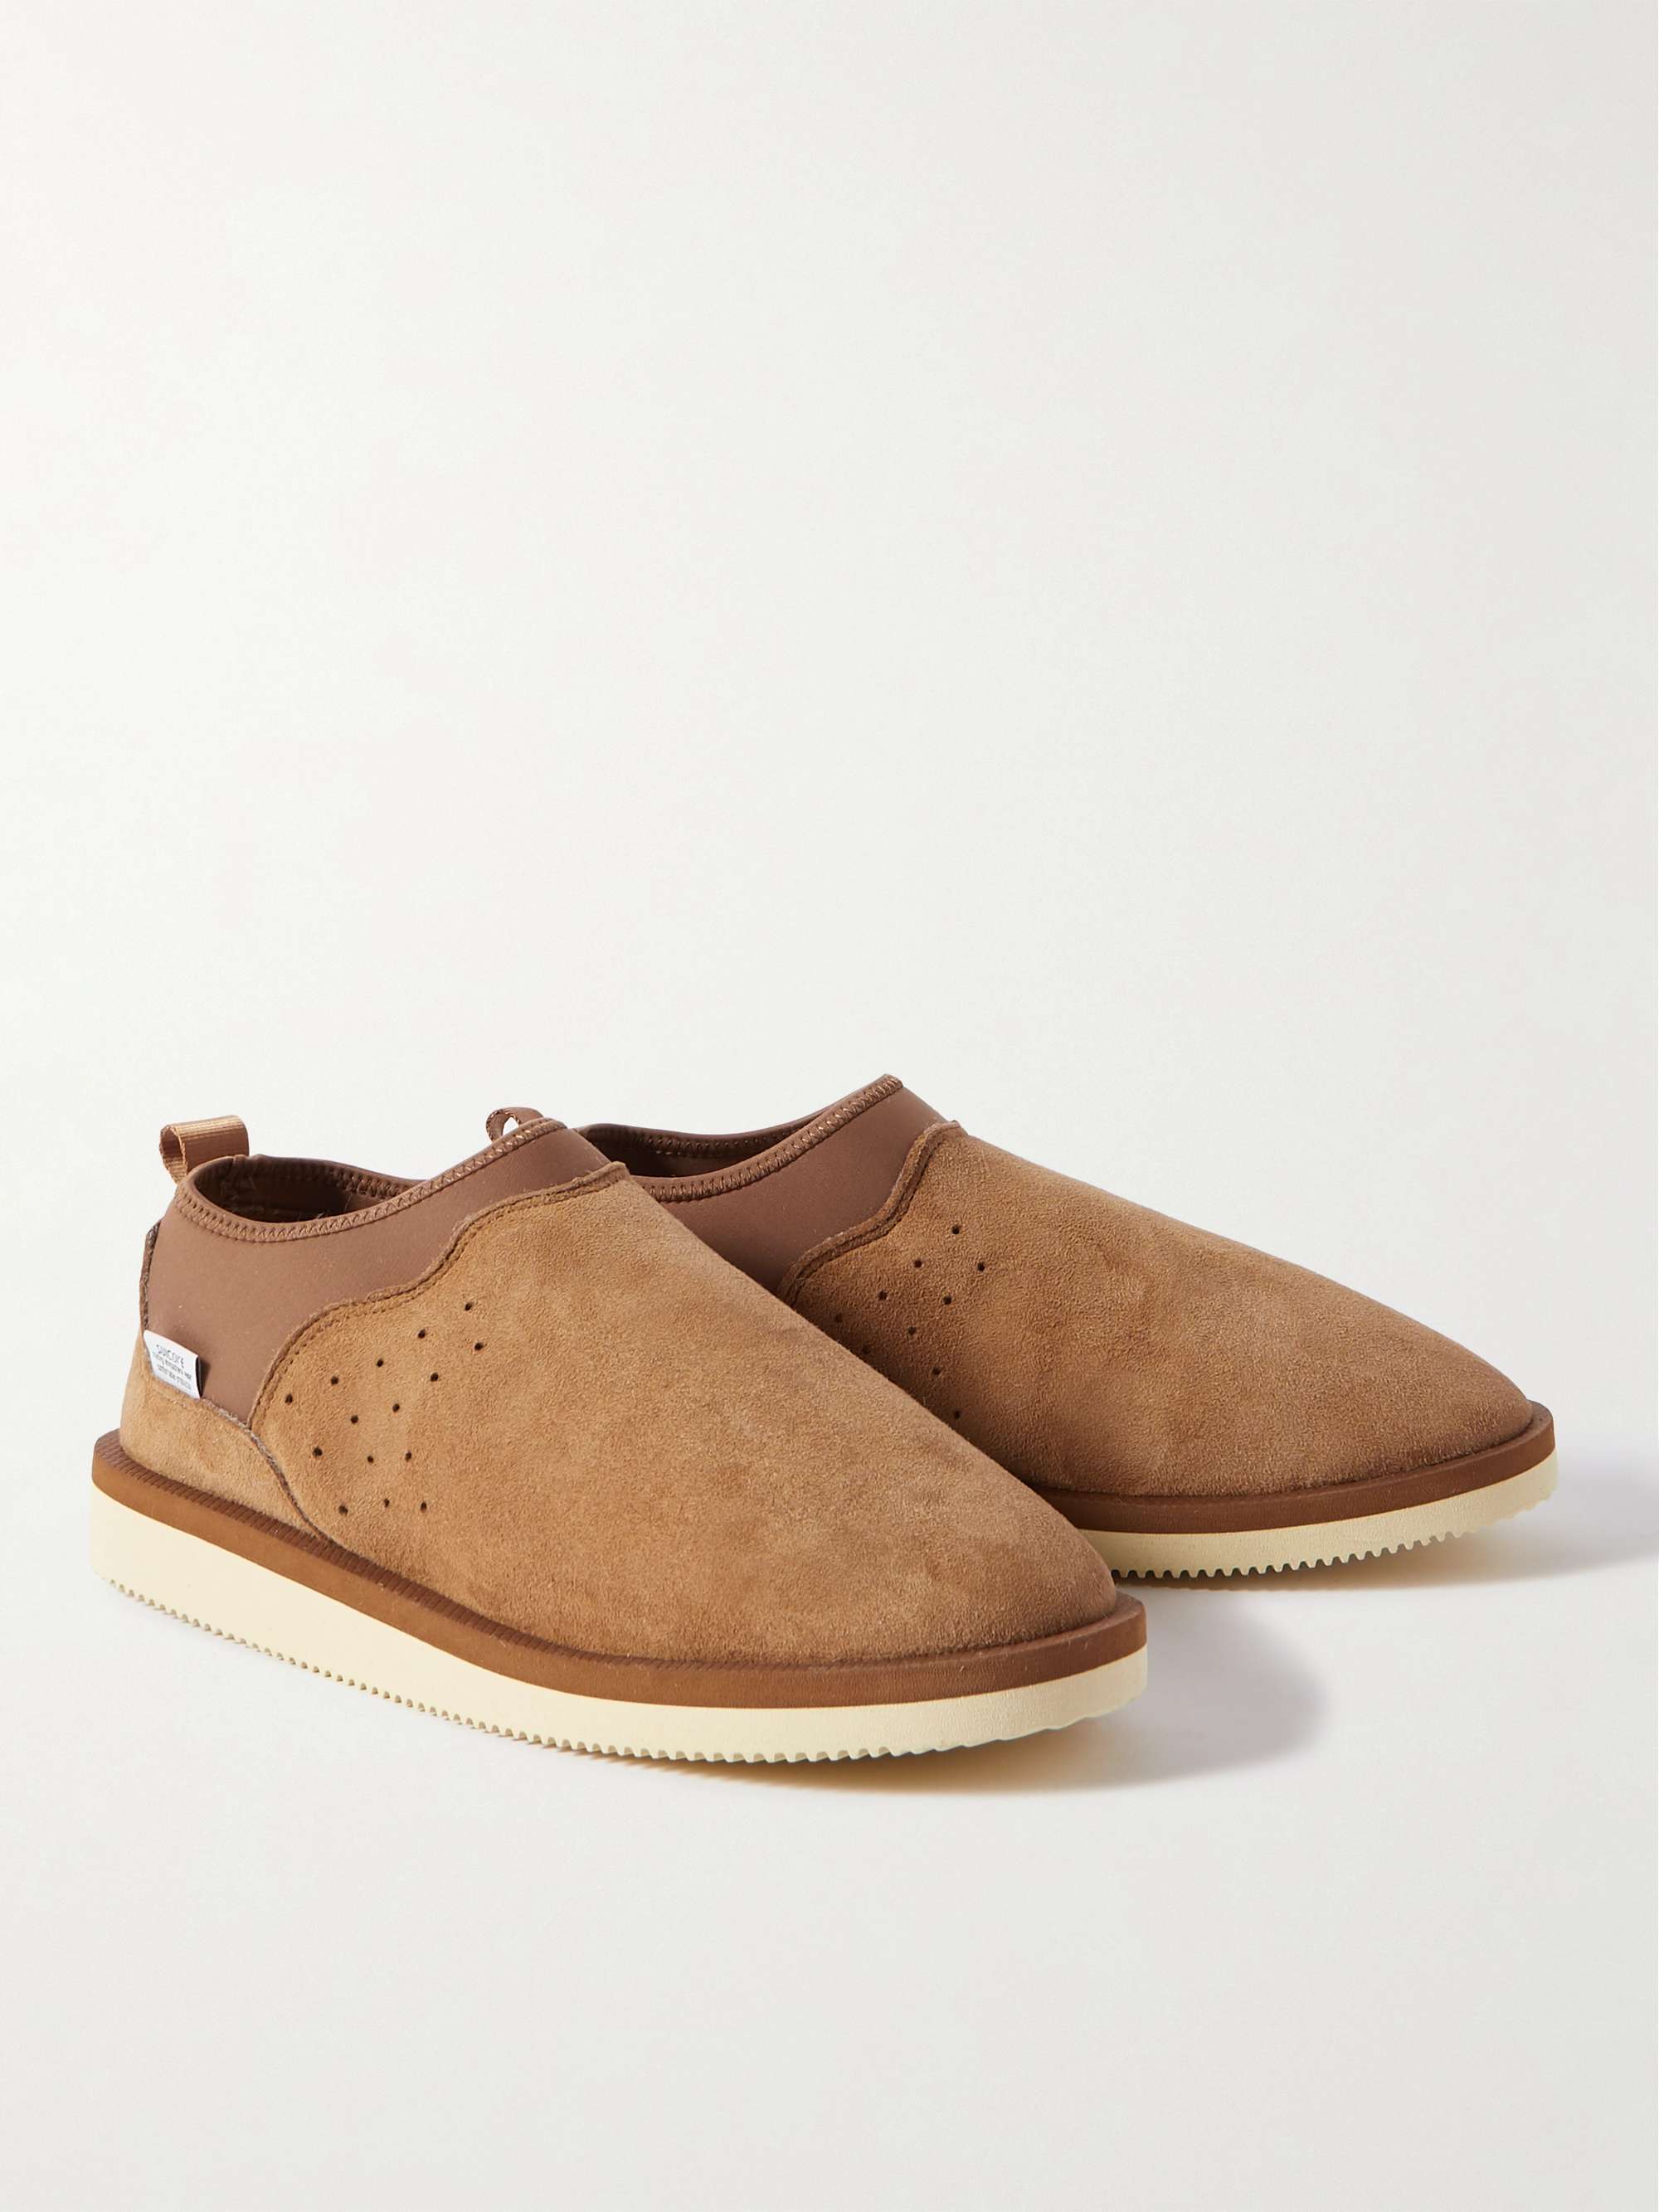 SUICOKE RON-M2ab-MID Shearling-Lined Suede and Jersey Slippers | MR PORTER